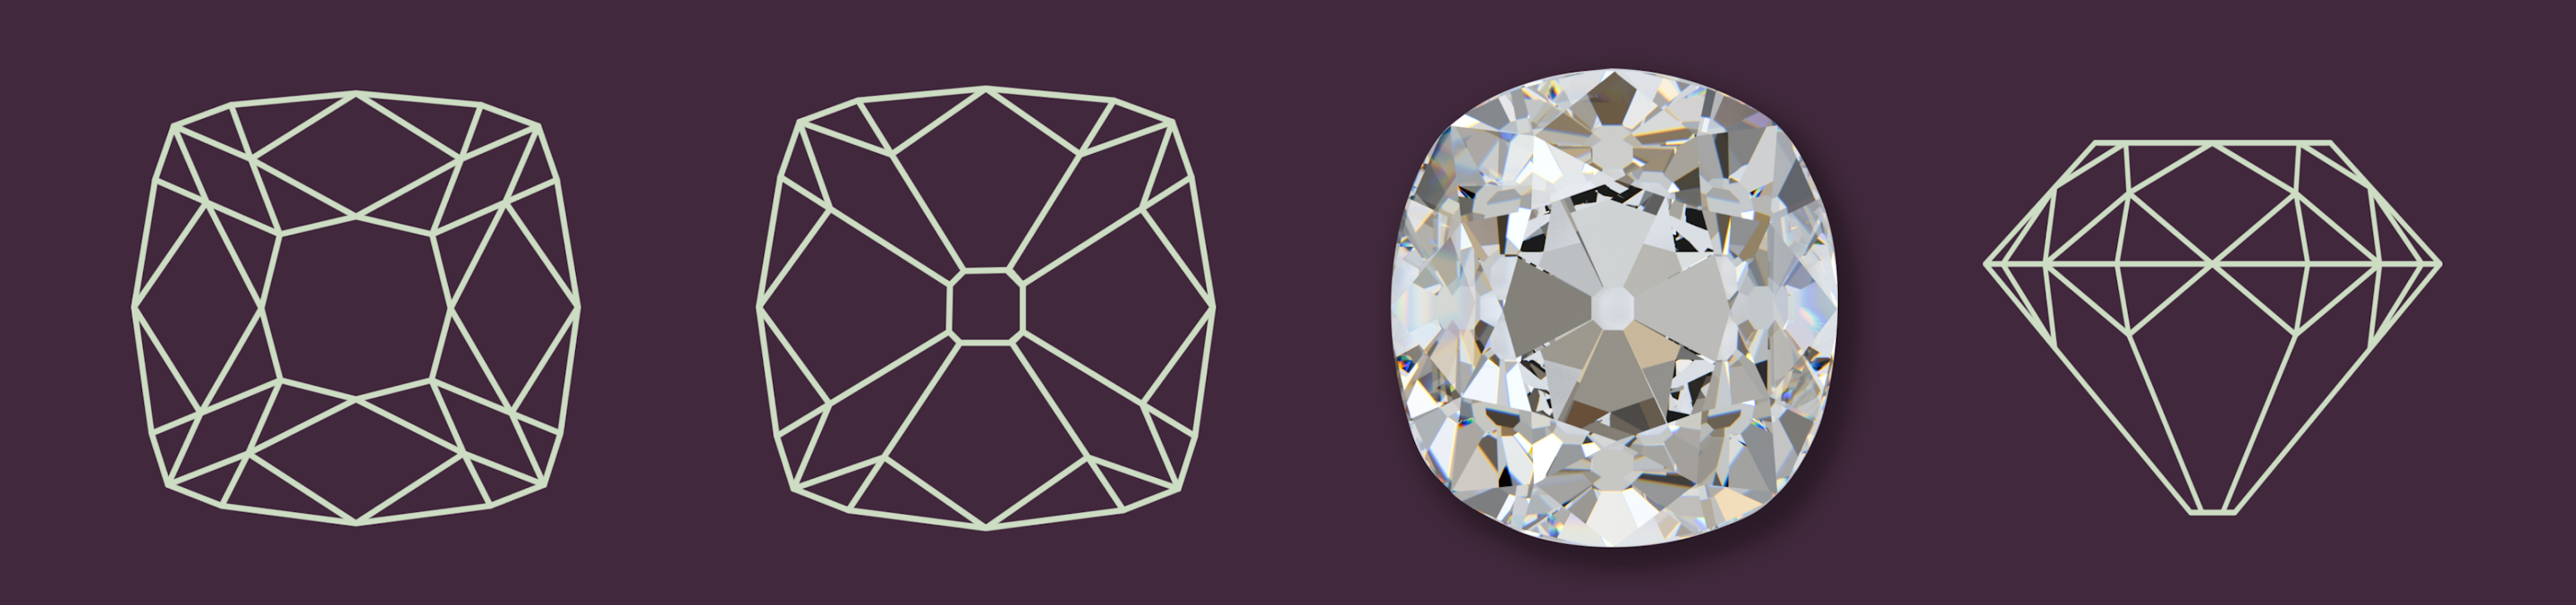 top, bottom, side and rendering of old mine cut diamond